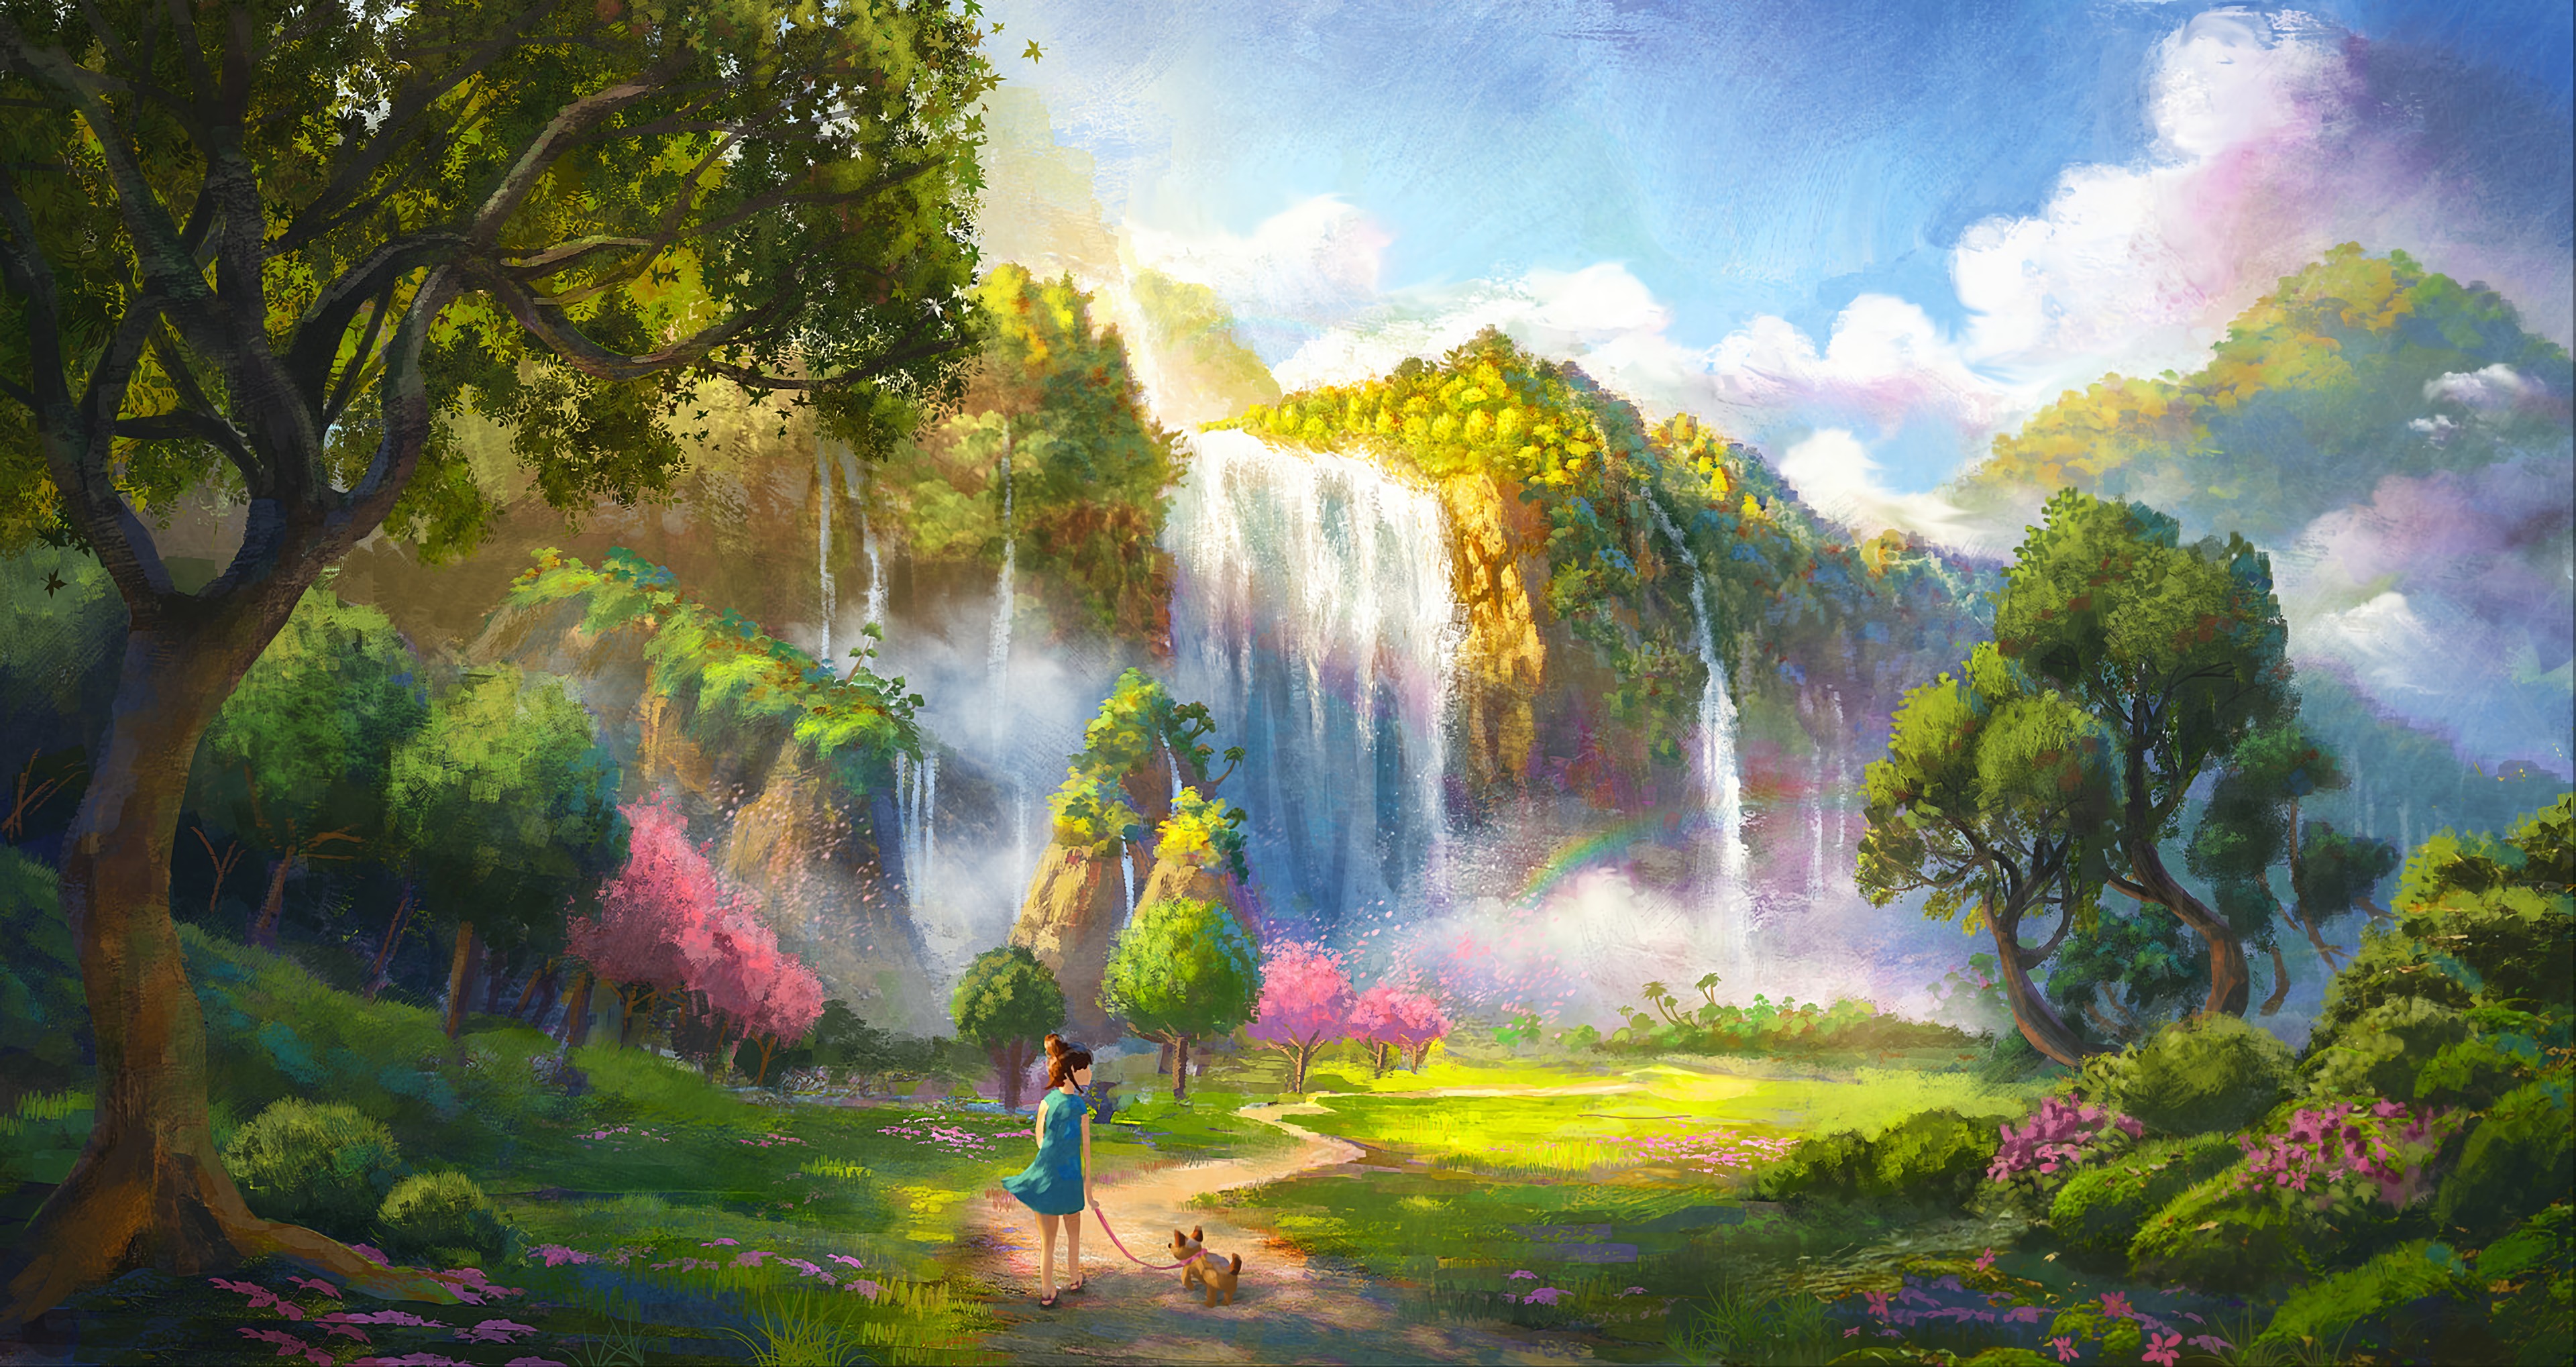 dog, art, girl, landscape, waterfall wallpapers for tablet